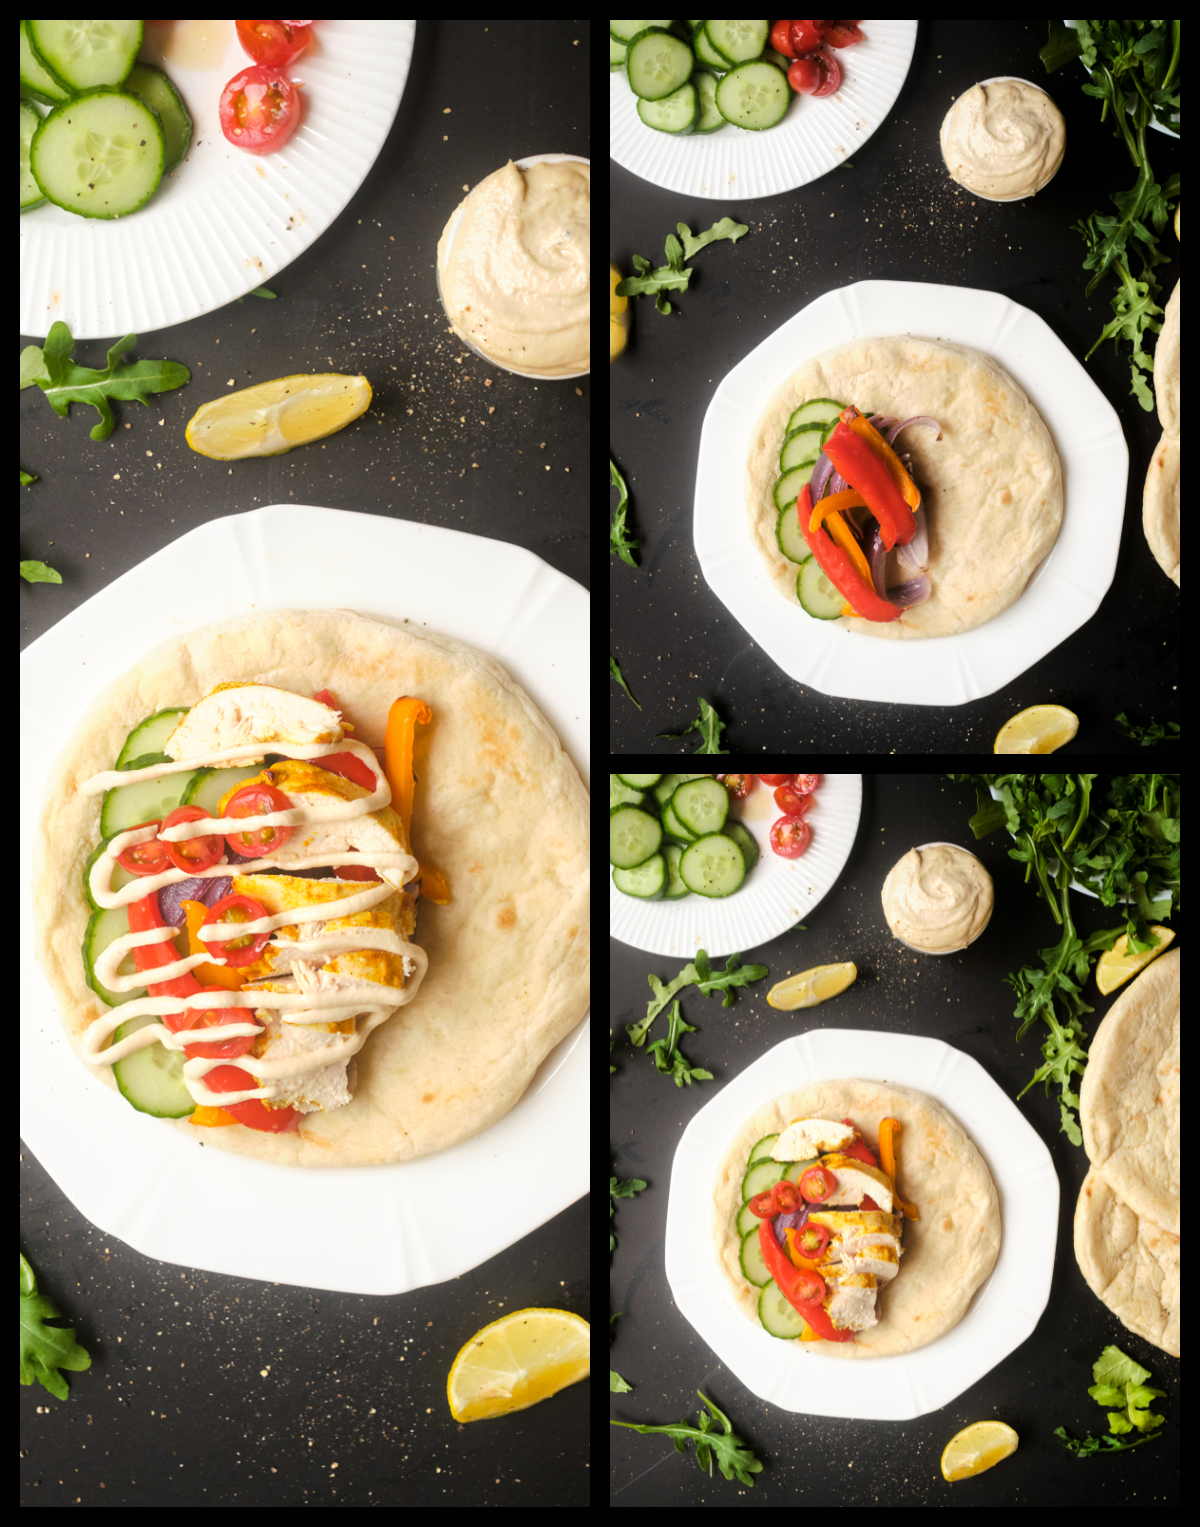 steps for putting together chicken shawarma and toppings in pita bread